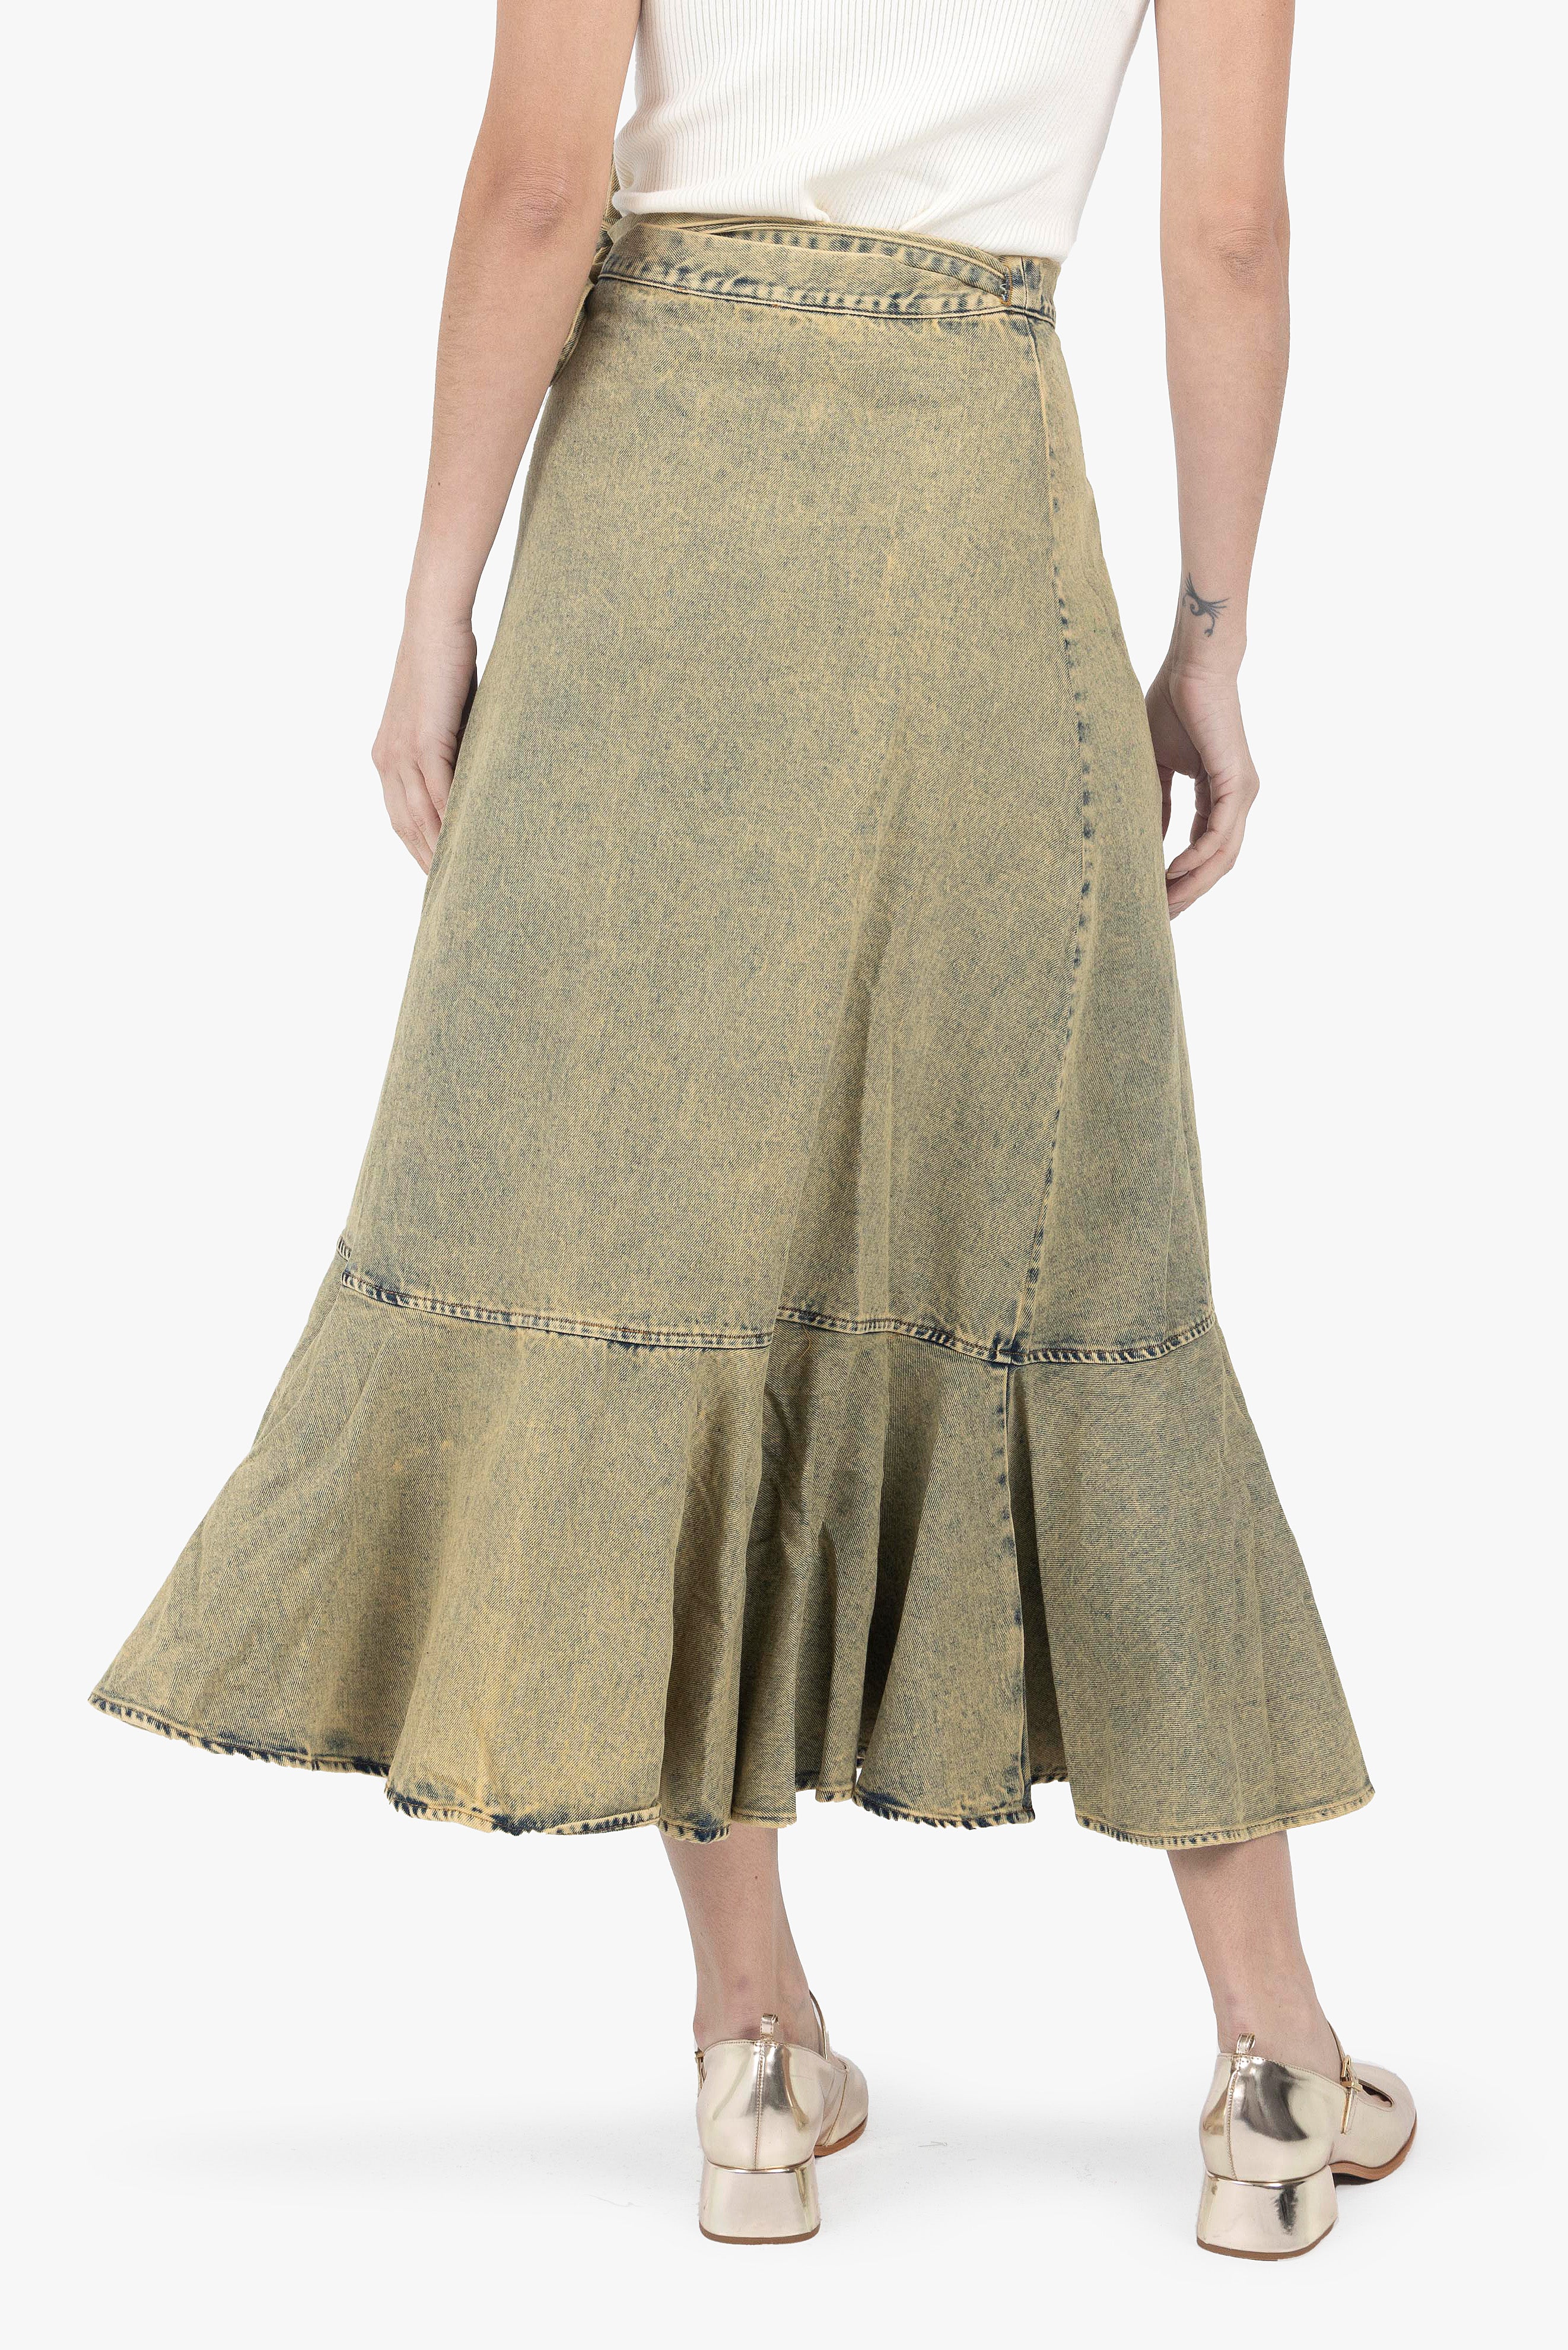 WASHED GREEN WRAP SKIRT